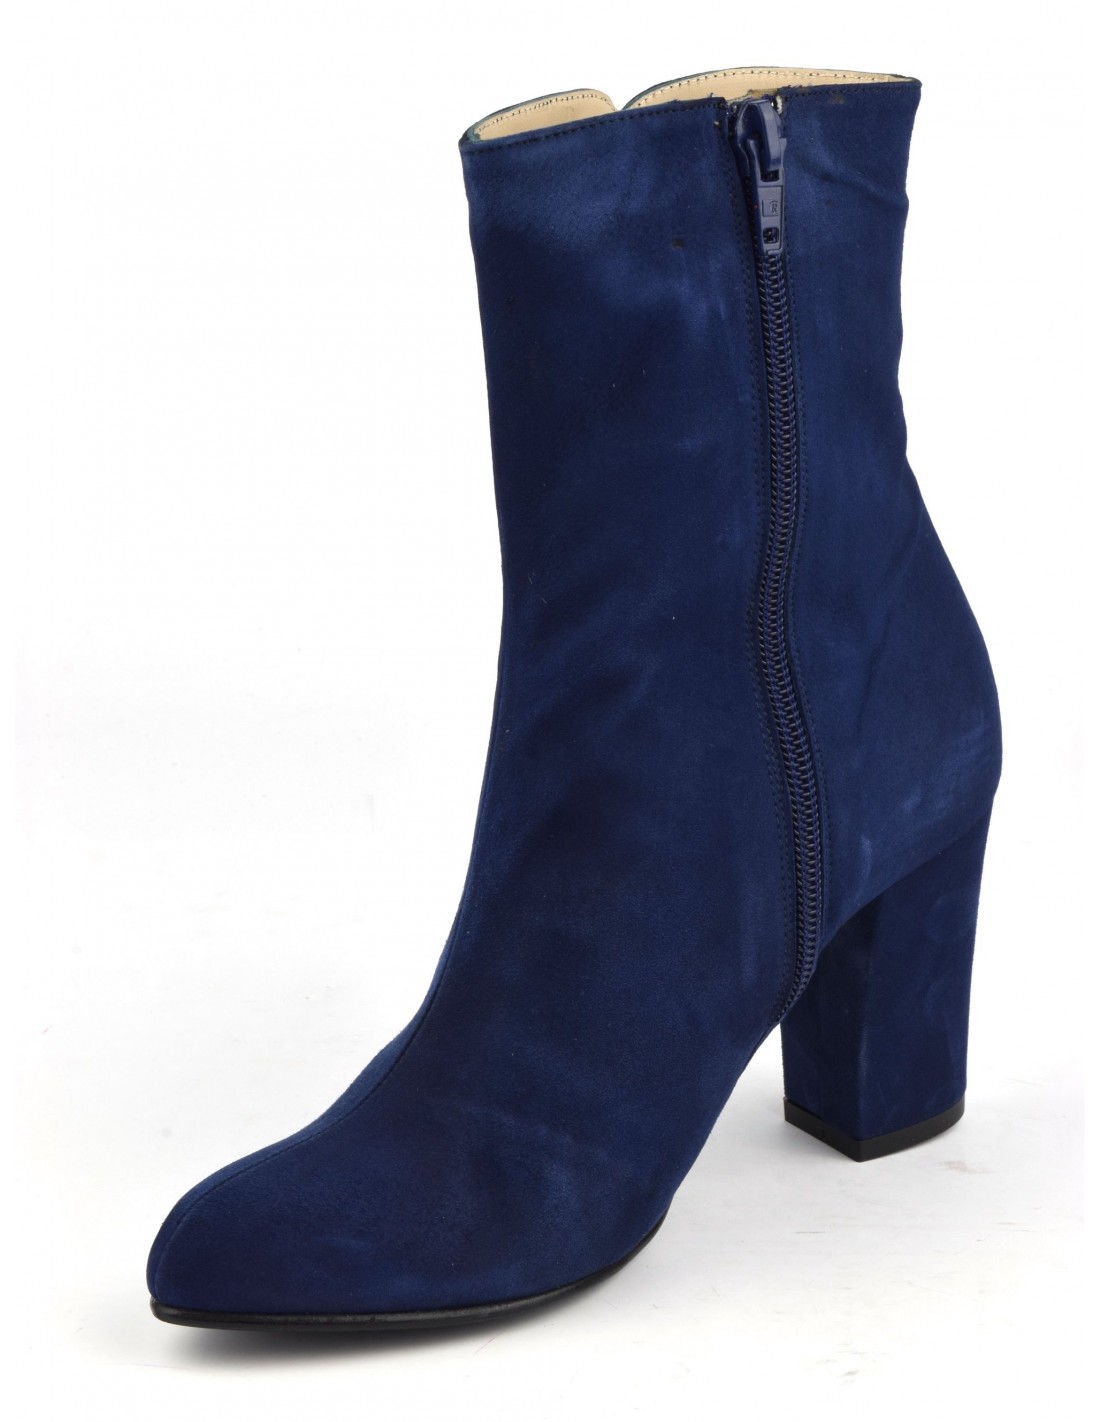 Royal blue suede leather ankle boots, high upper, MI-654, Maria Jamy